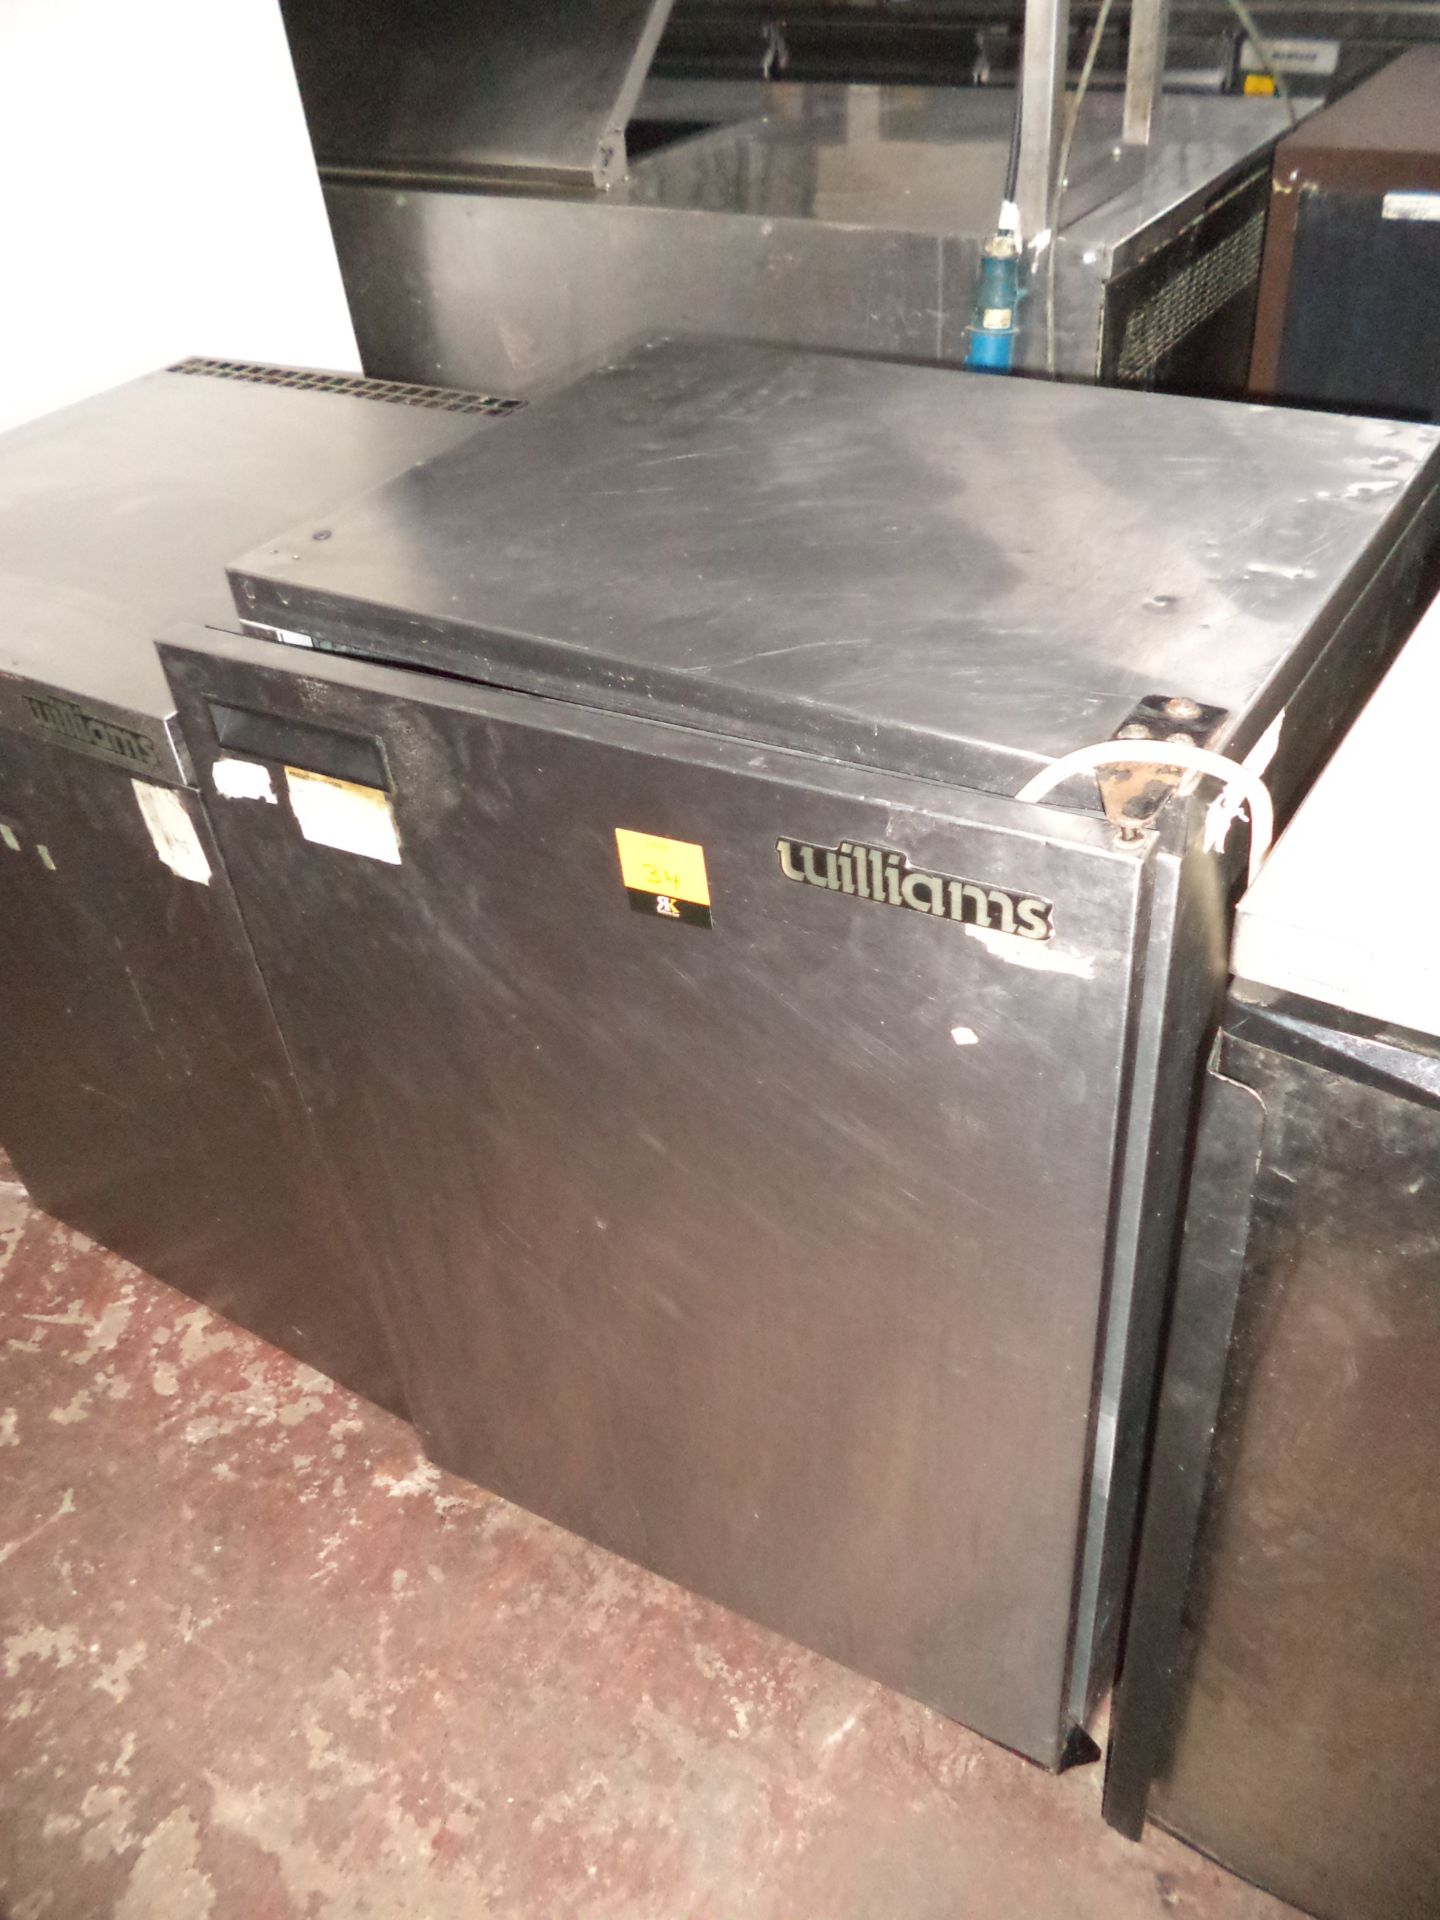 Williams stainless steel commercial counter height fridge, model BC155 IMPORTANT: Please remember